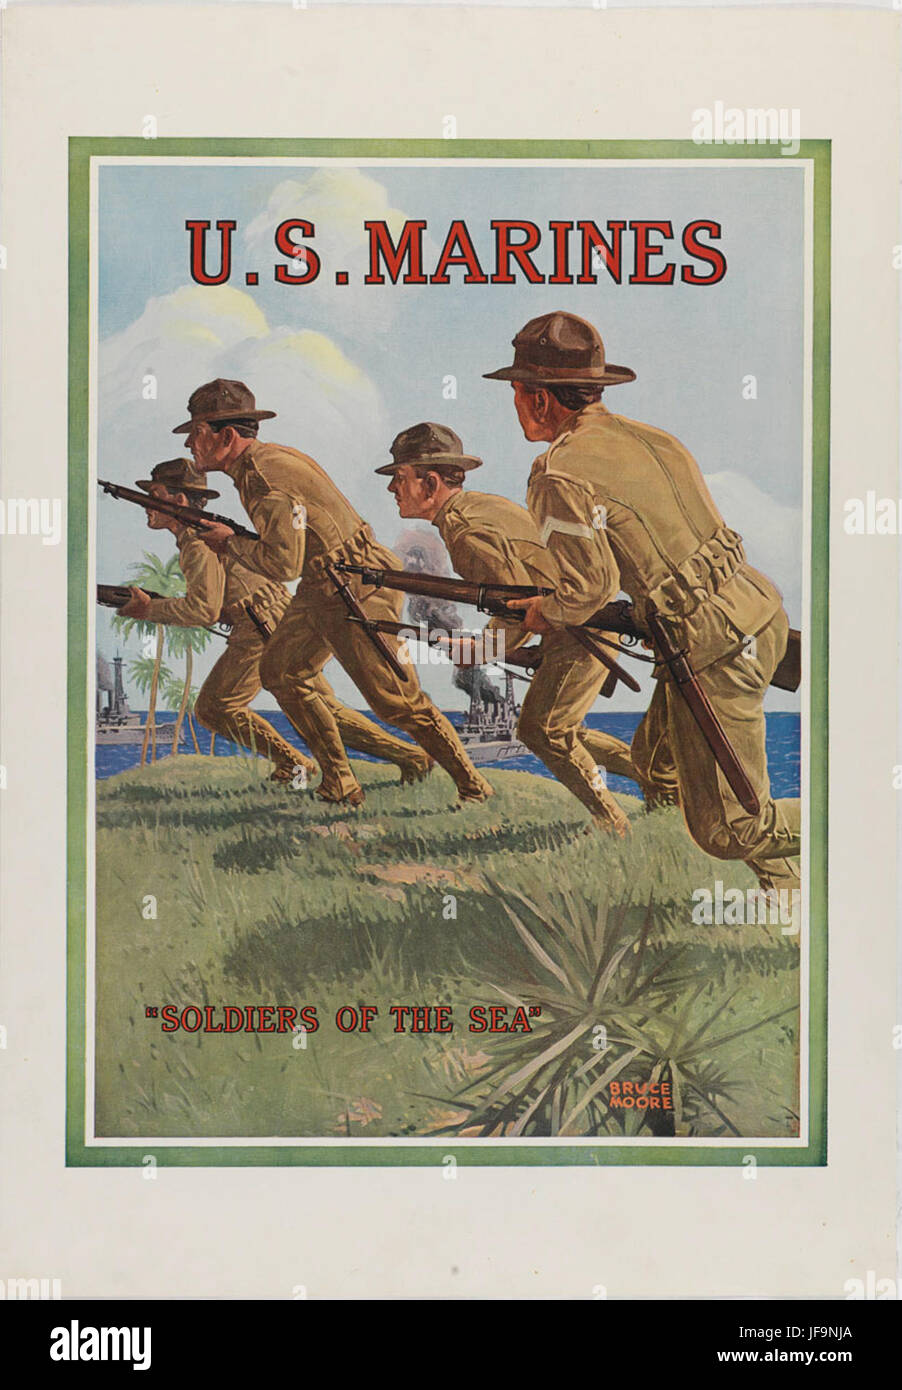 US Marines, Soldiers of the Sea 34778125881 o Stock Photo